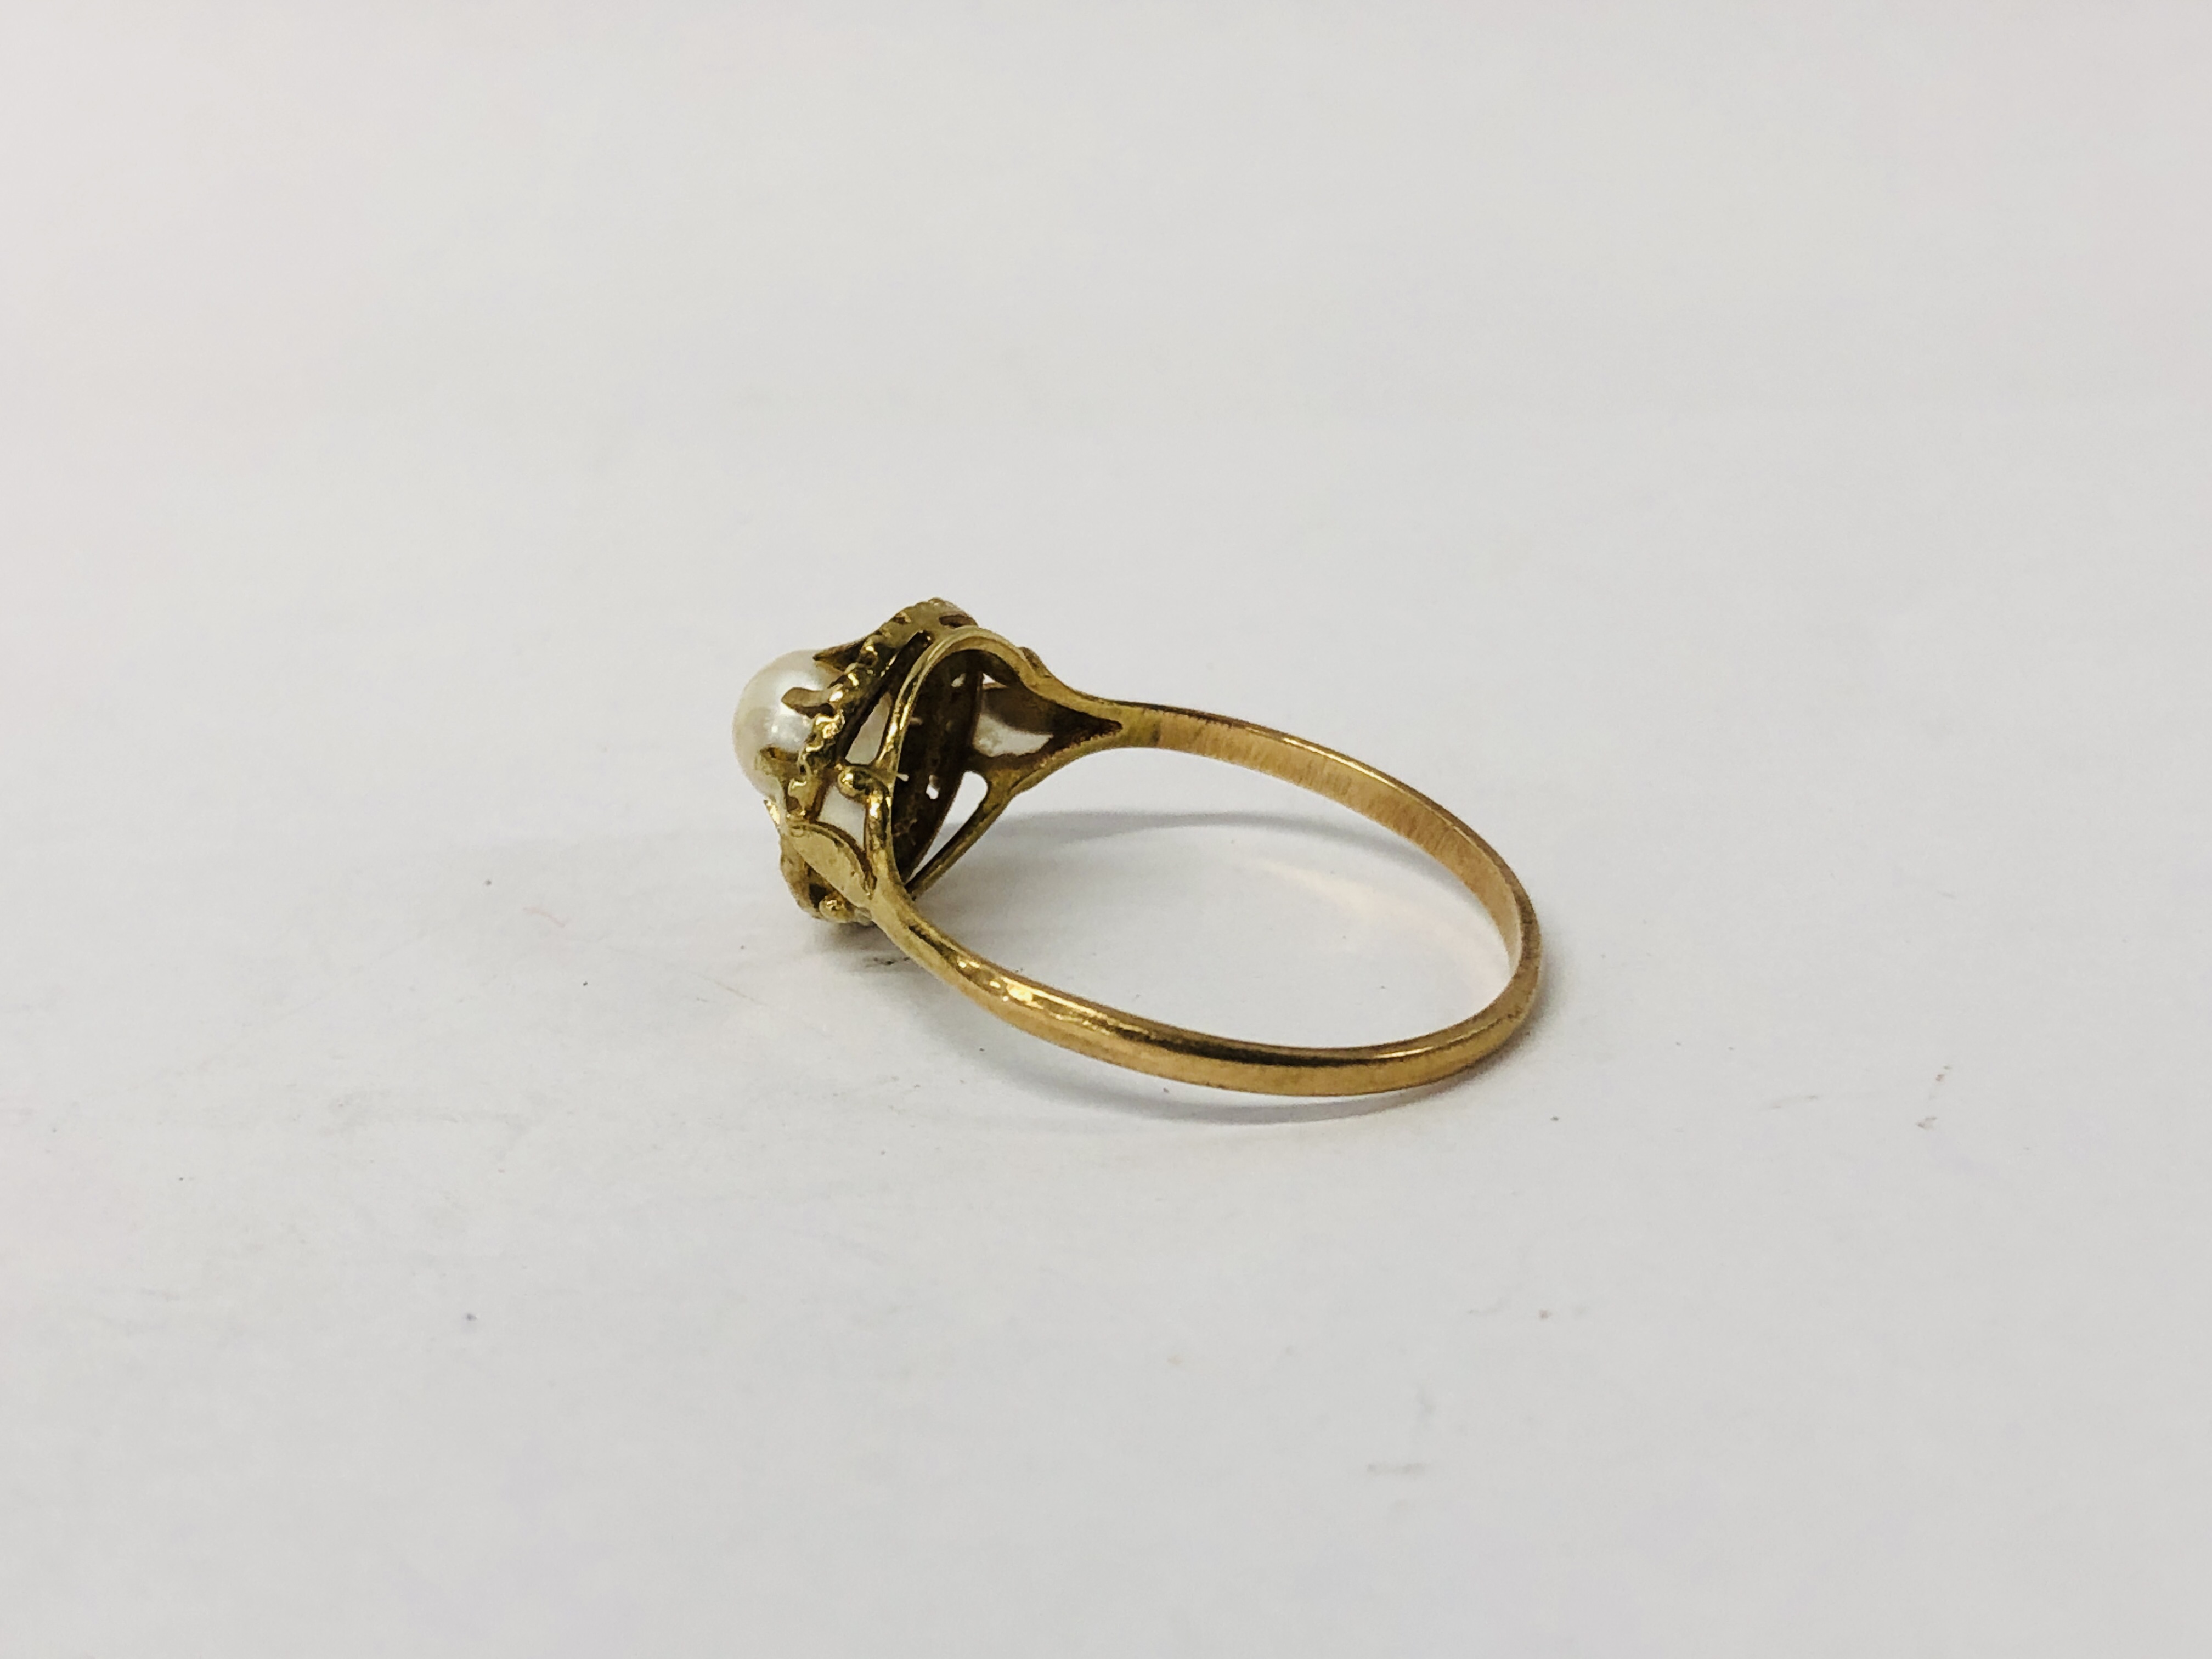 A PEARL RING, A SINGLE CLAW SET STONE, ON AN UNMARKED YELLOW METAL BAND. - Image 4 of 8